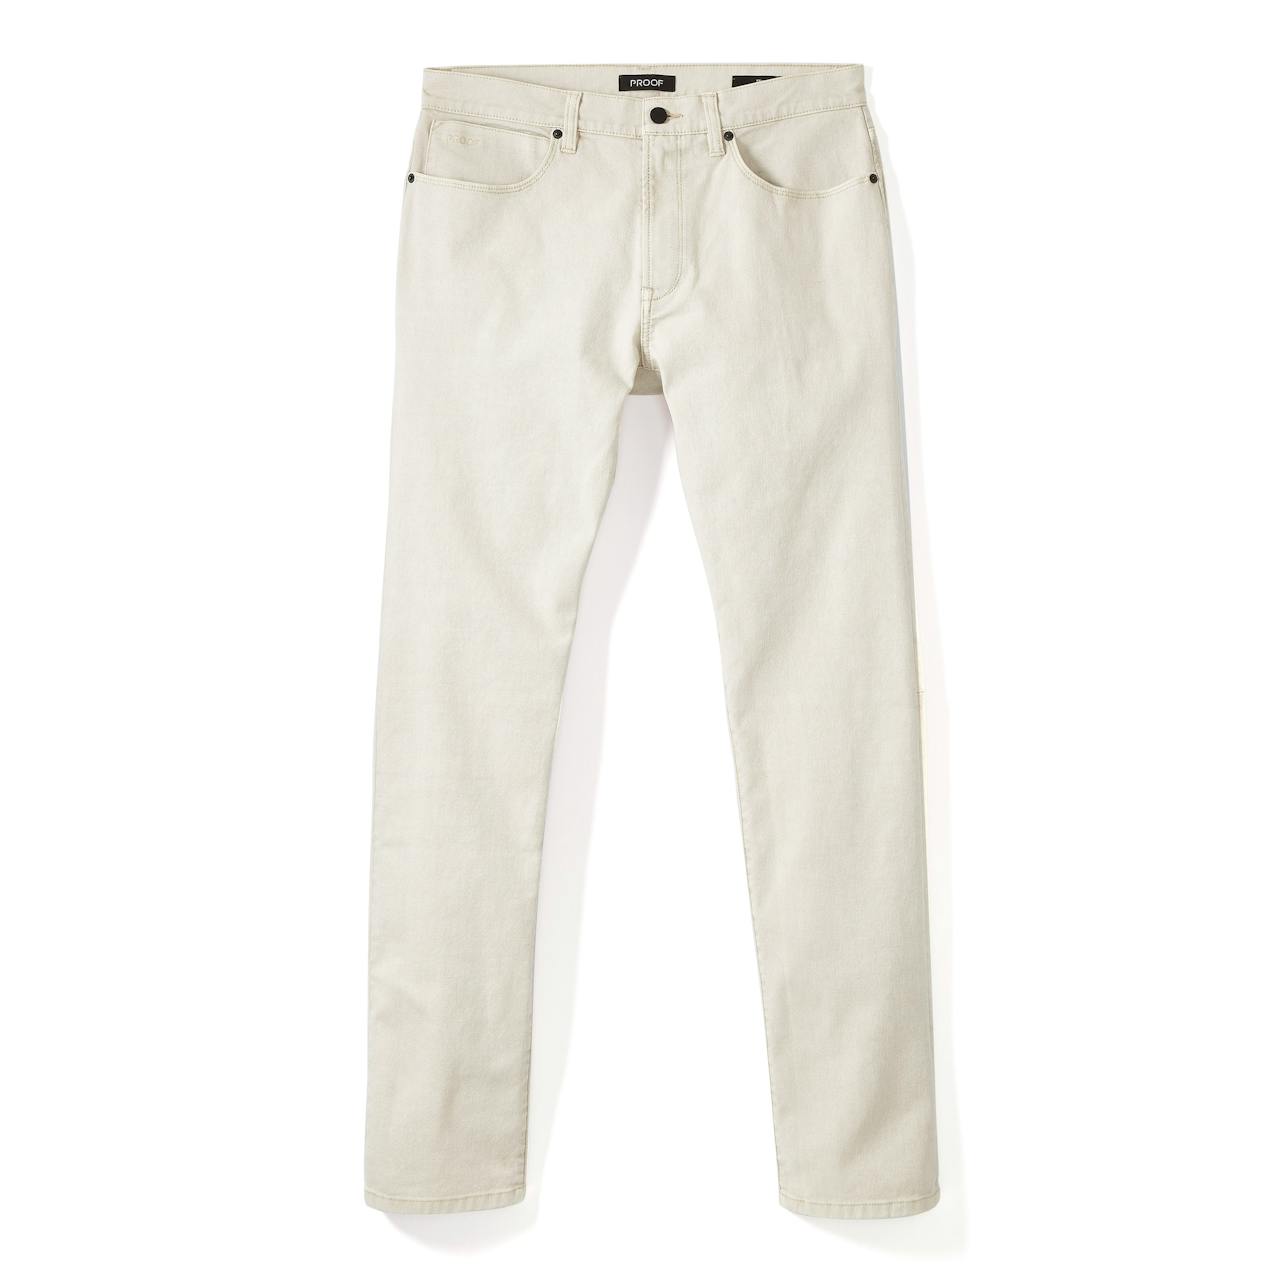 Proof Rover Pant - Slim